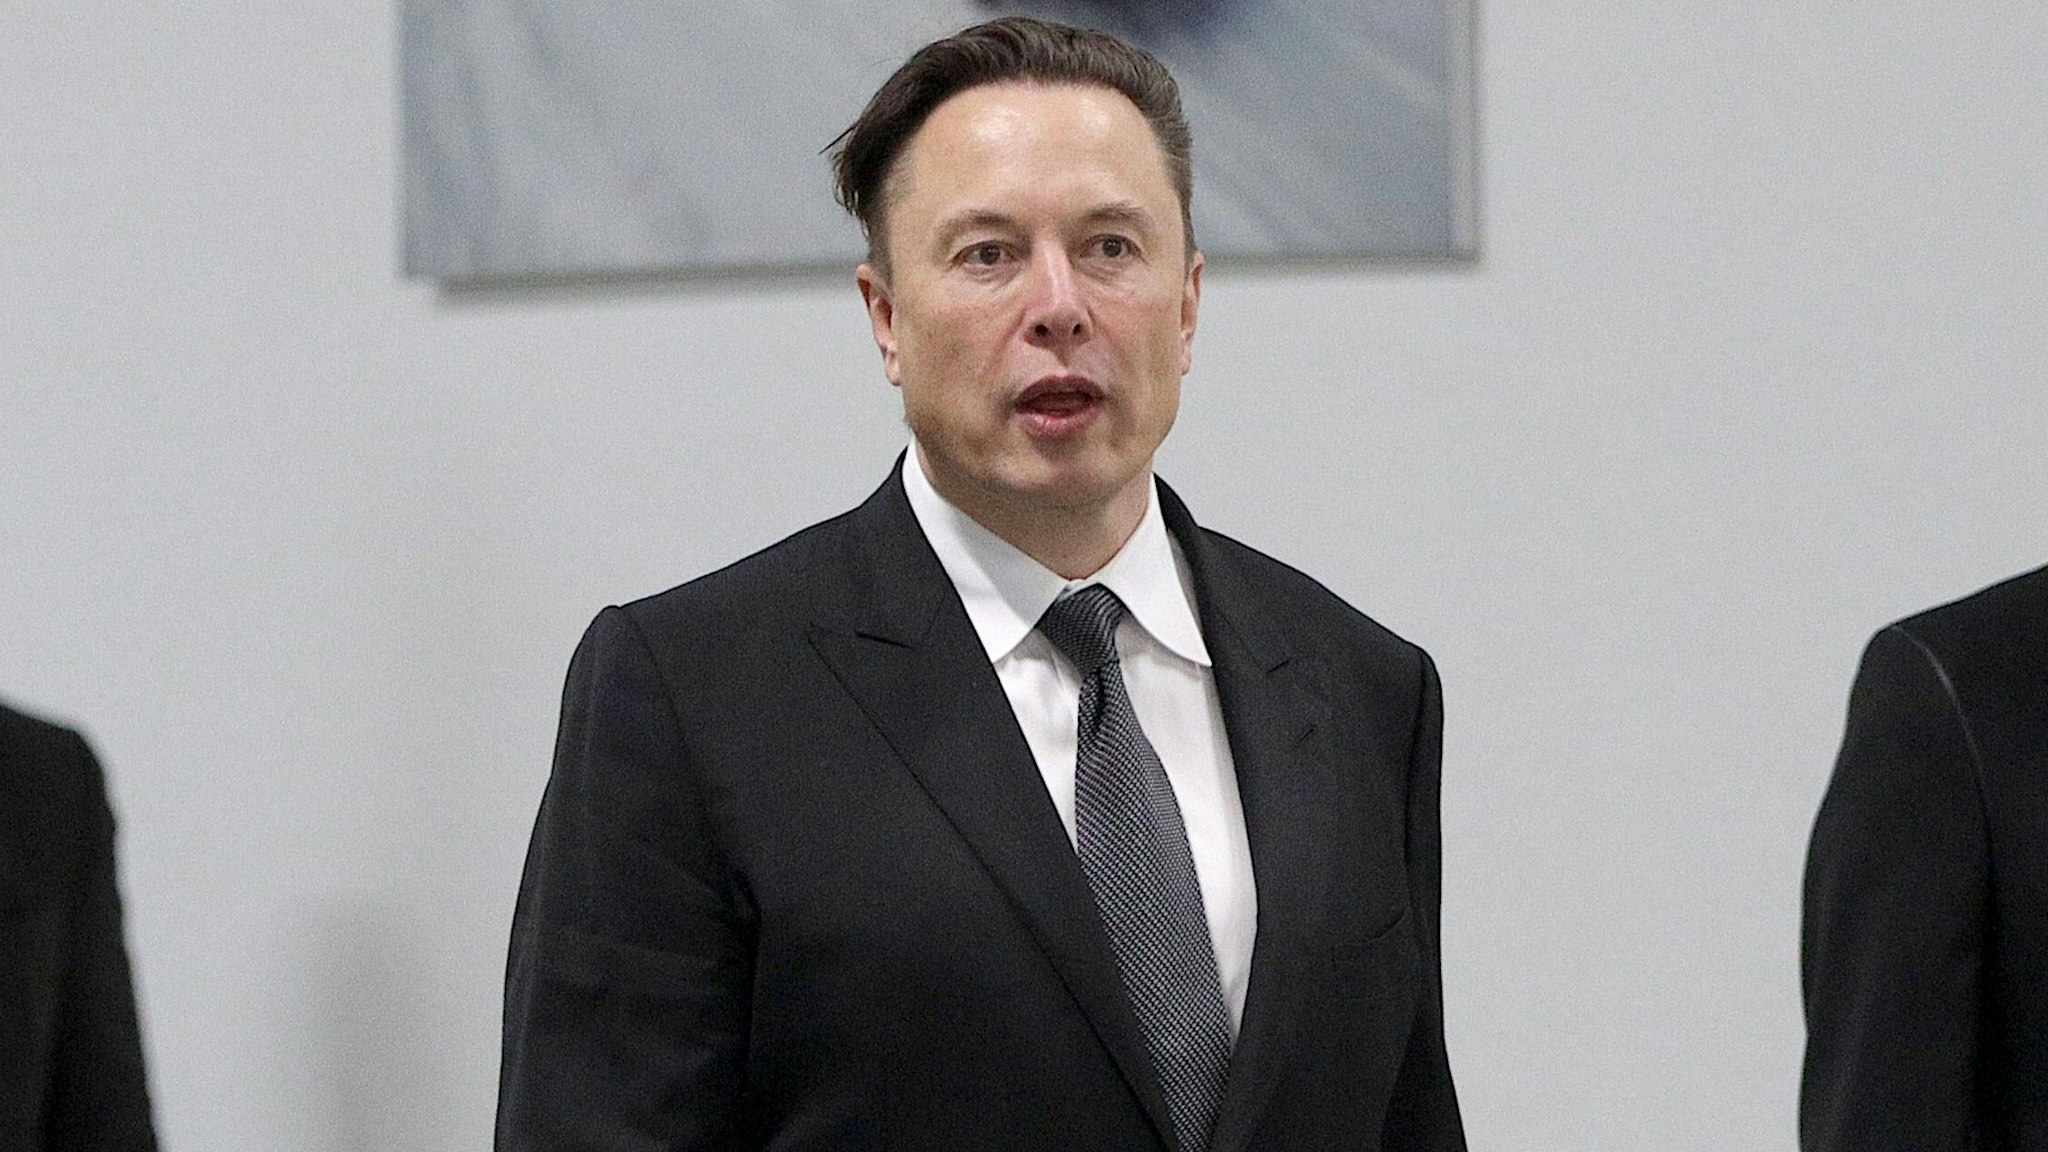 GRUENHEIDE, GERMANY - MARCH 22: Tesla CEO Elon Musk (R) arrives with German Chancellor Olaf Scholz during the official opening of the new Tesla electric car manufacturing plant on March 22, 2022 near Gruenheide, Germany. The new plant, officially called the Gigafactory Berlin-Brandenburg, is producing the Model Y as well as electric car batteries.